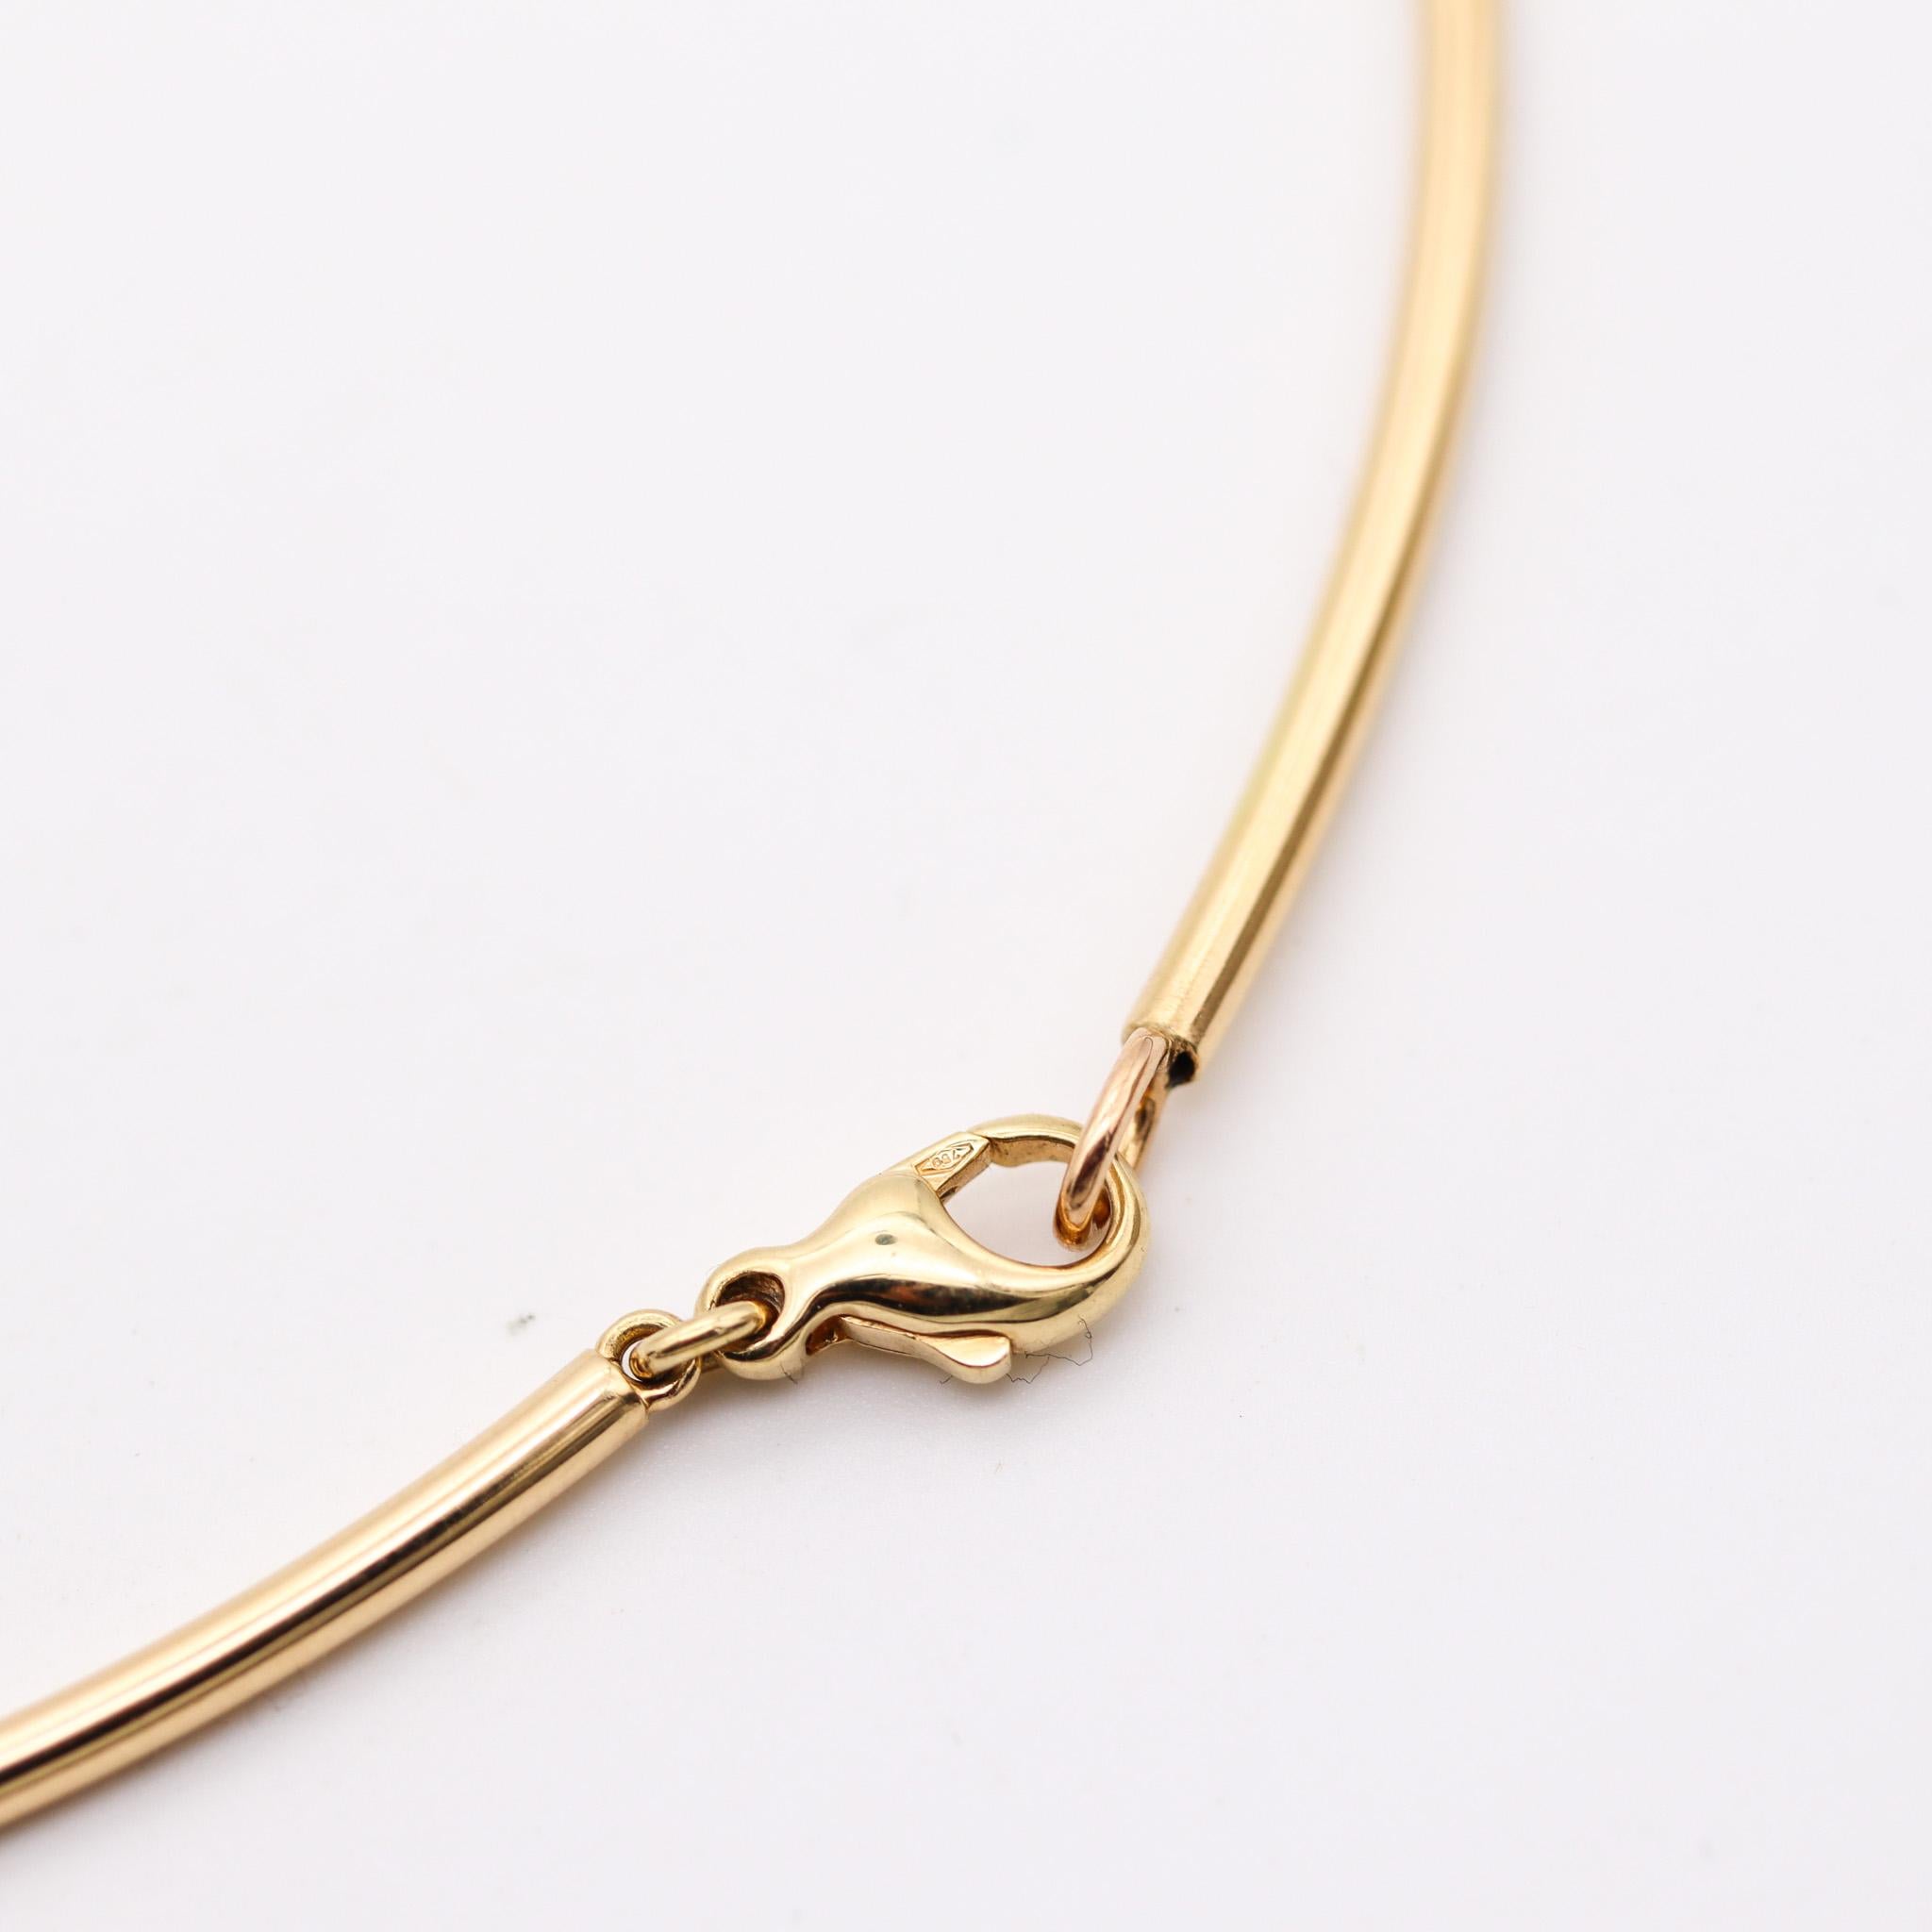 Modernist Giorgio Facchini Sculptural Kinetic Orbital Necklace In 18Kt Yellow Gold For Sale